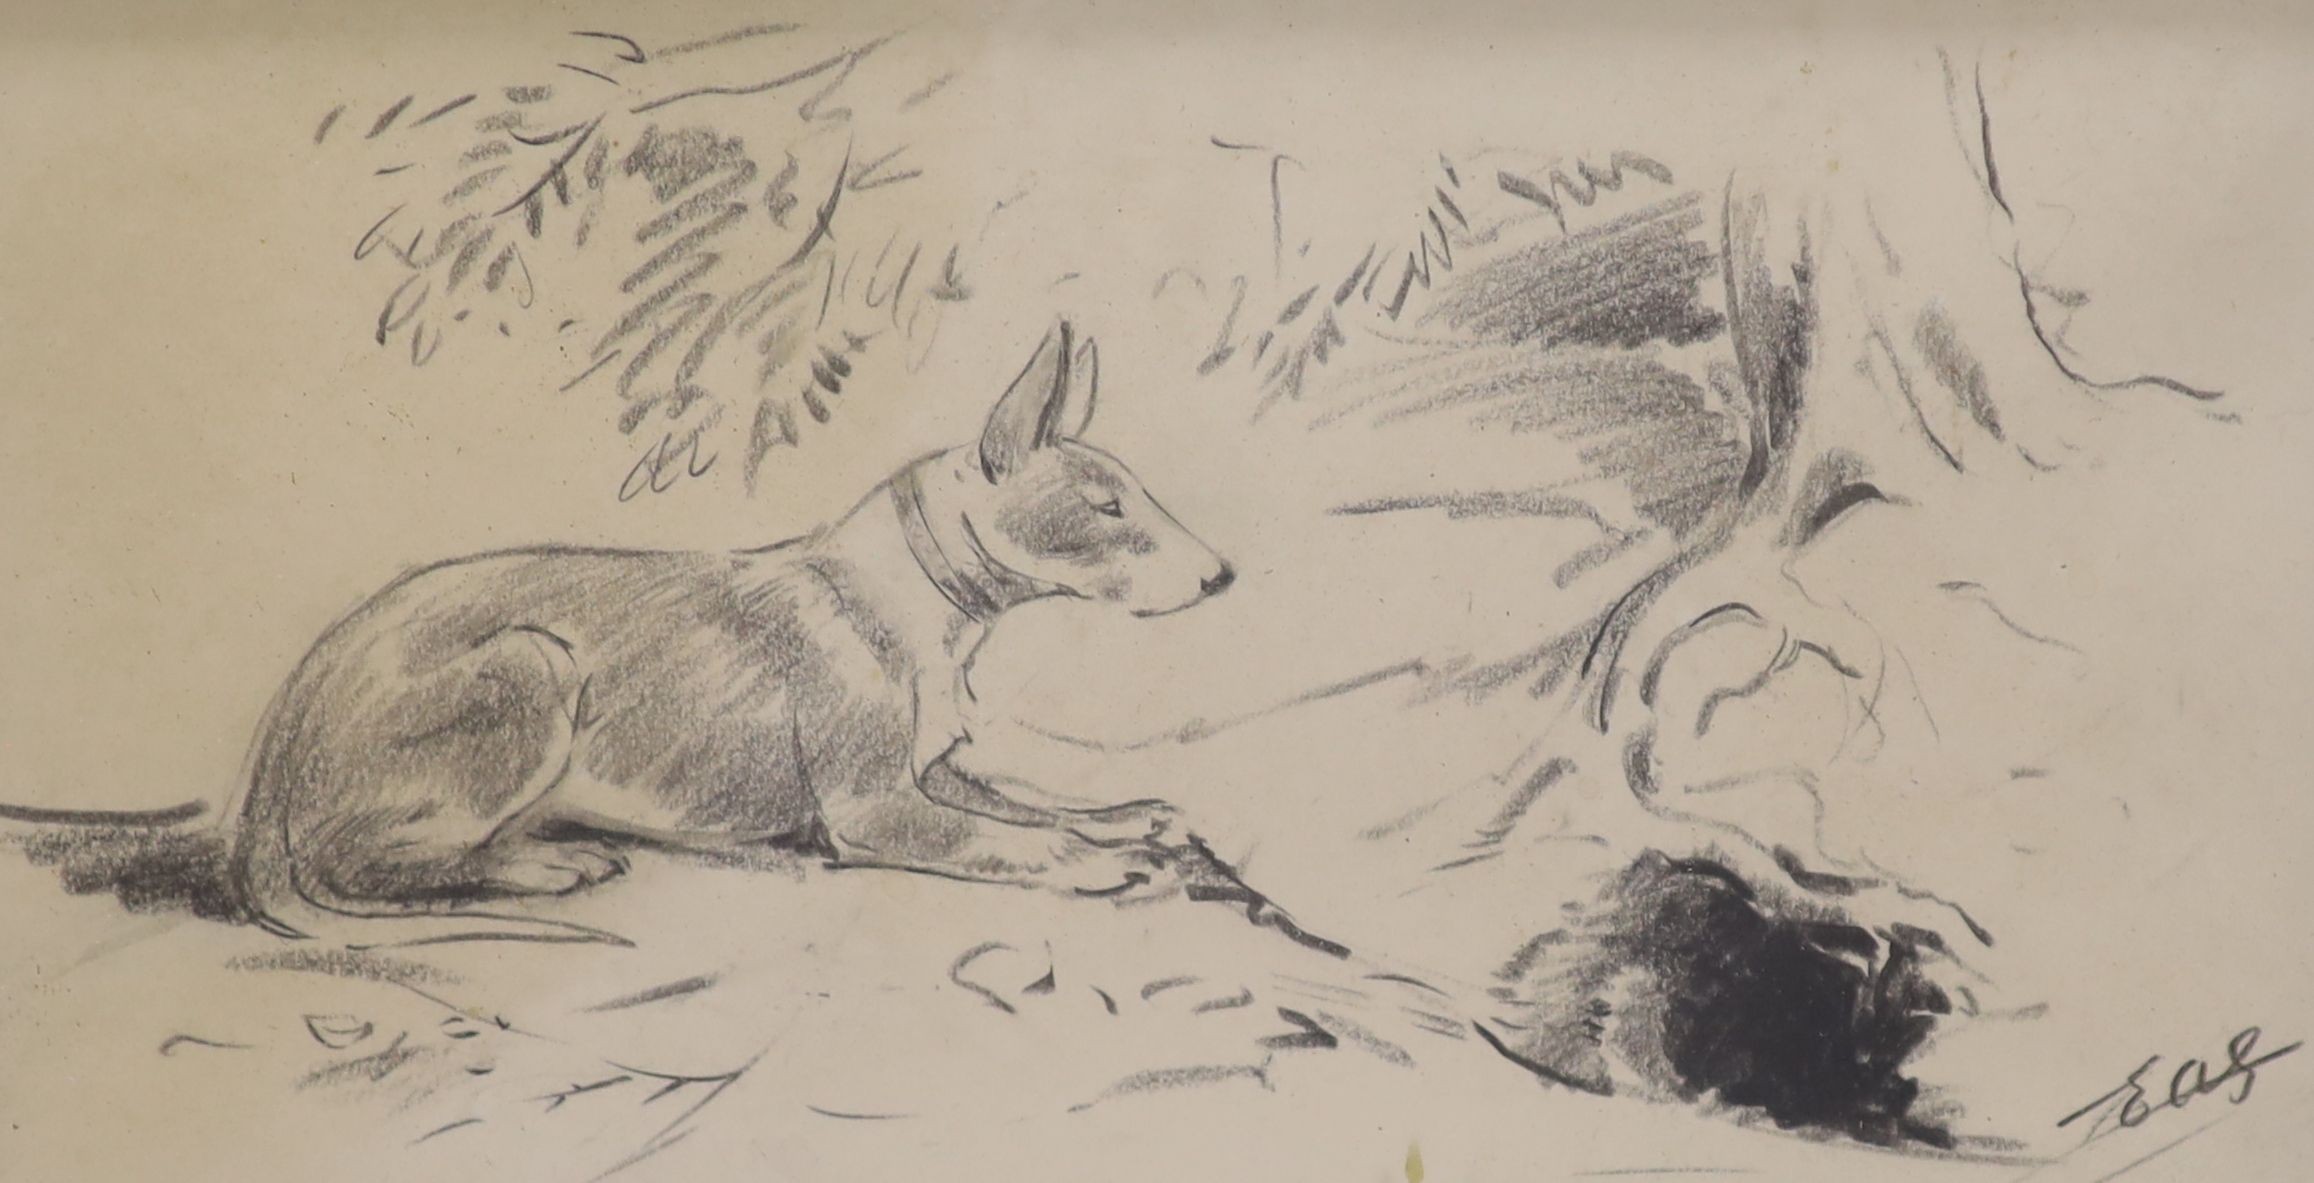 Eileen Alice Soper (1905-1990), two original pencil illustrations for the book ‘Bully and the Badger’ by Wickham Malins, initialled, 9 x 16.5cm, sold with a copy of the book